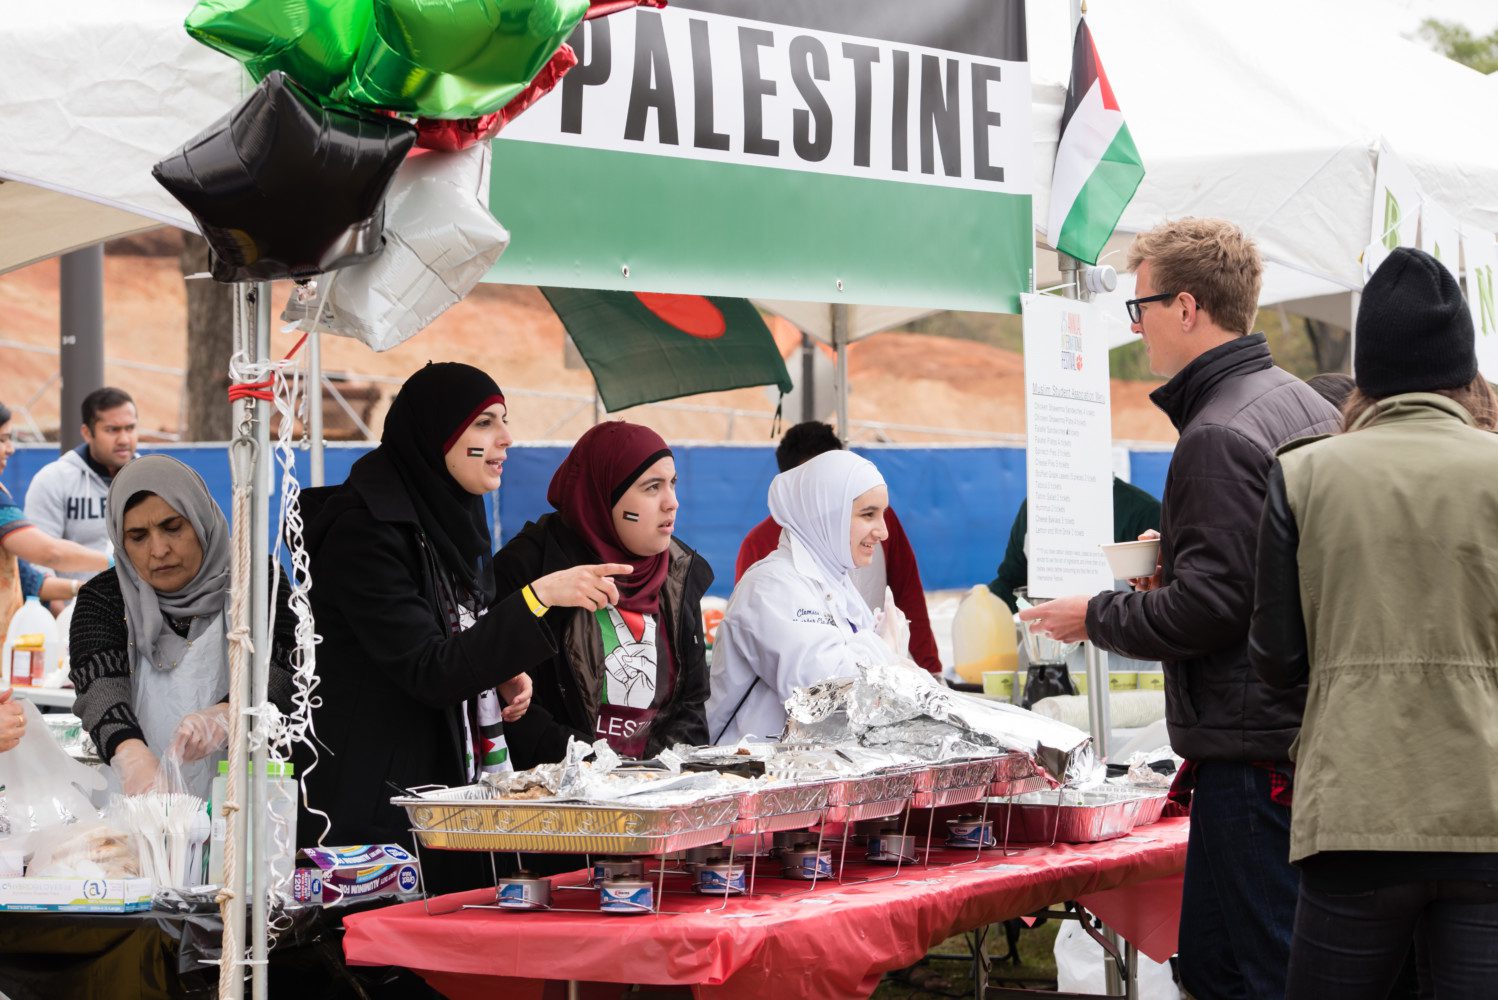 A photo of one of the food stands at last year's International Festival.